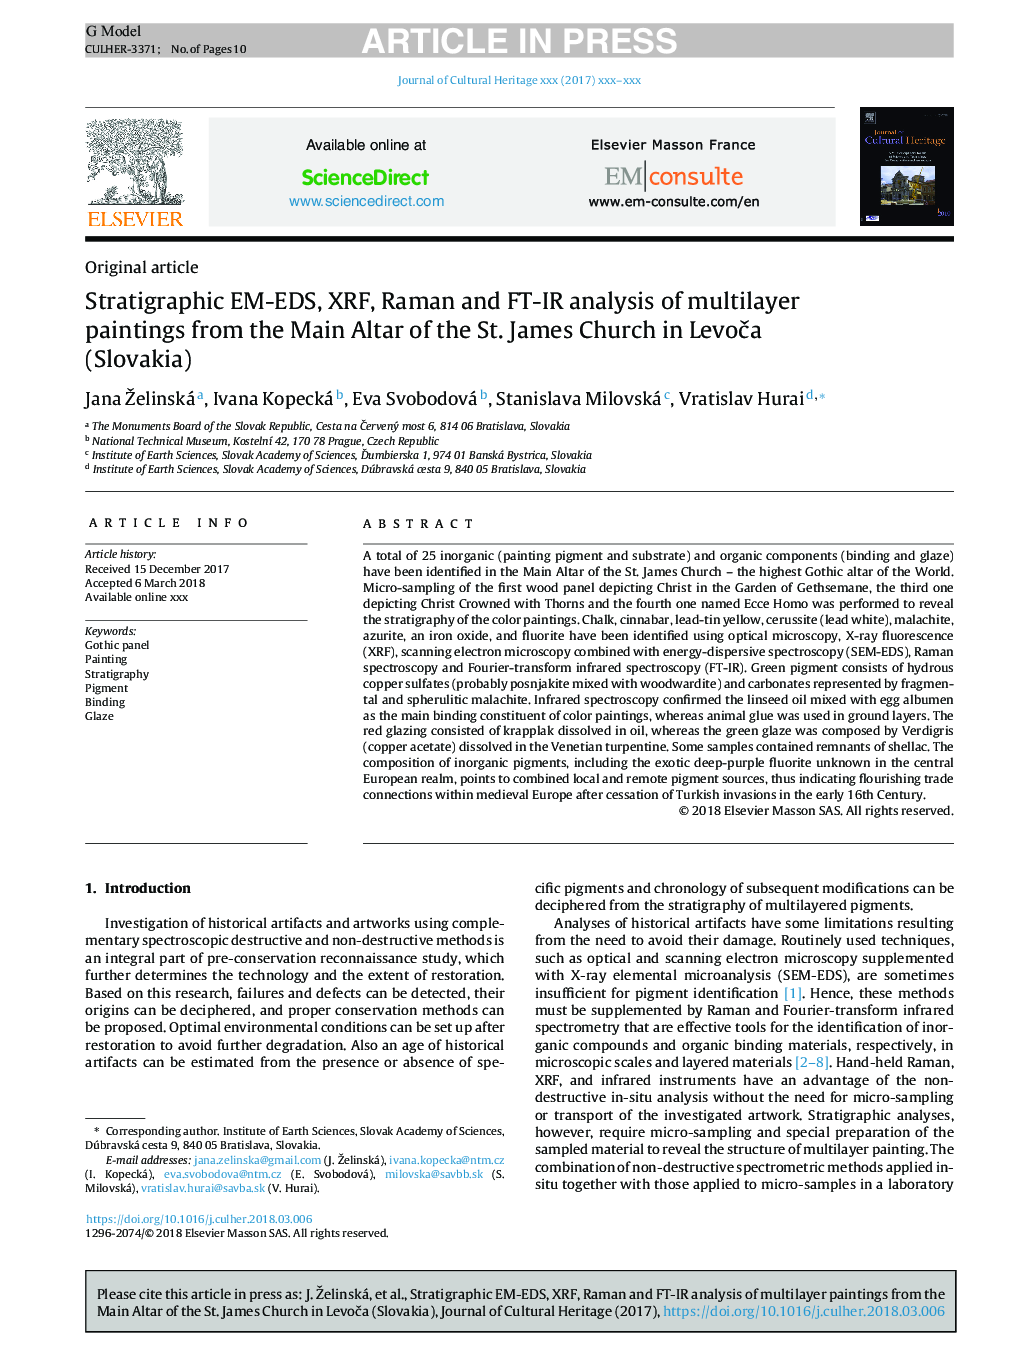 Stratigraphic EM-EDS, XRF, Raman and FT-IR analysis of multilayer paintings from the Main Altar of the St. James Church in LevoÄa (Slovakia)